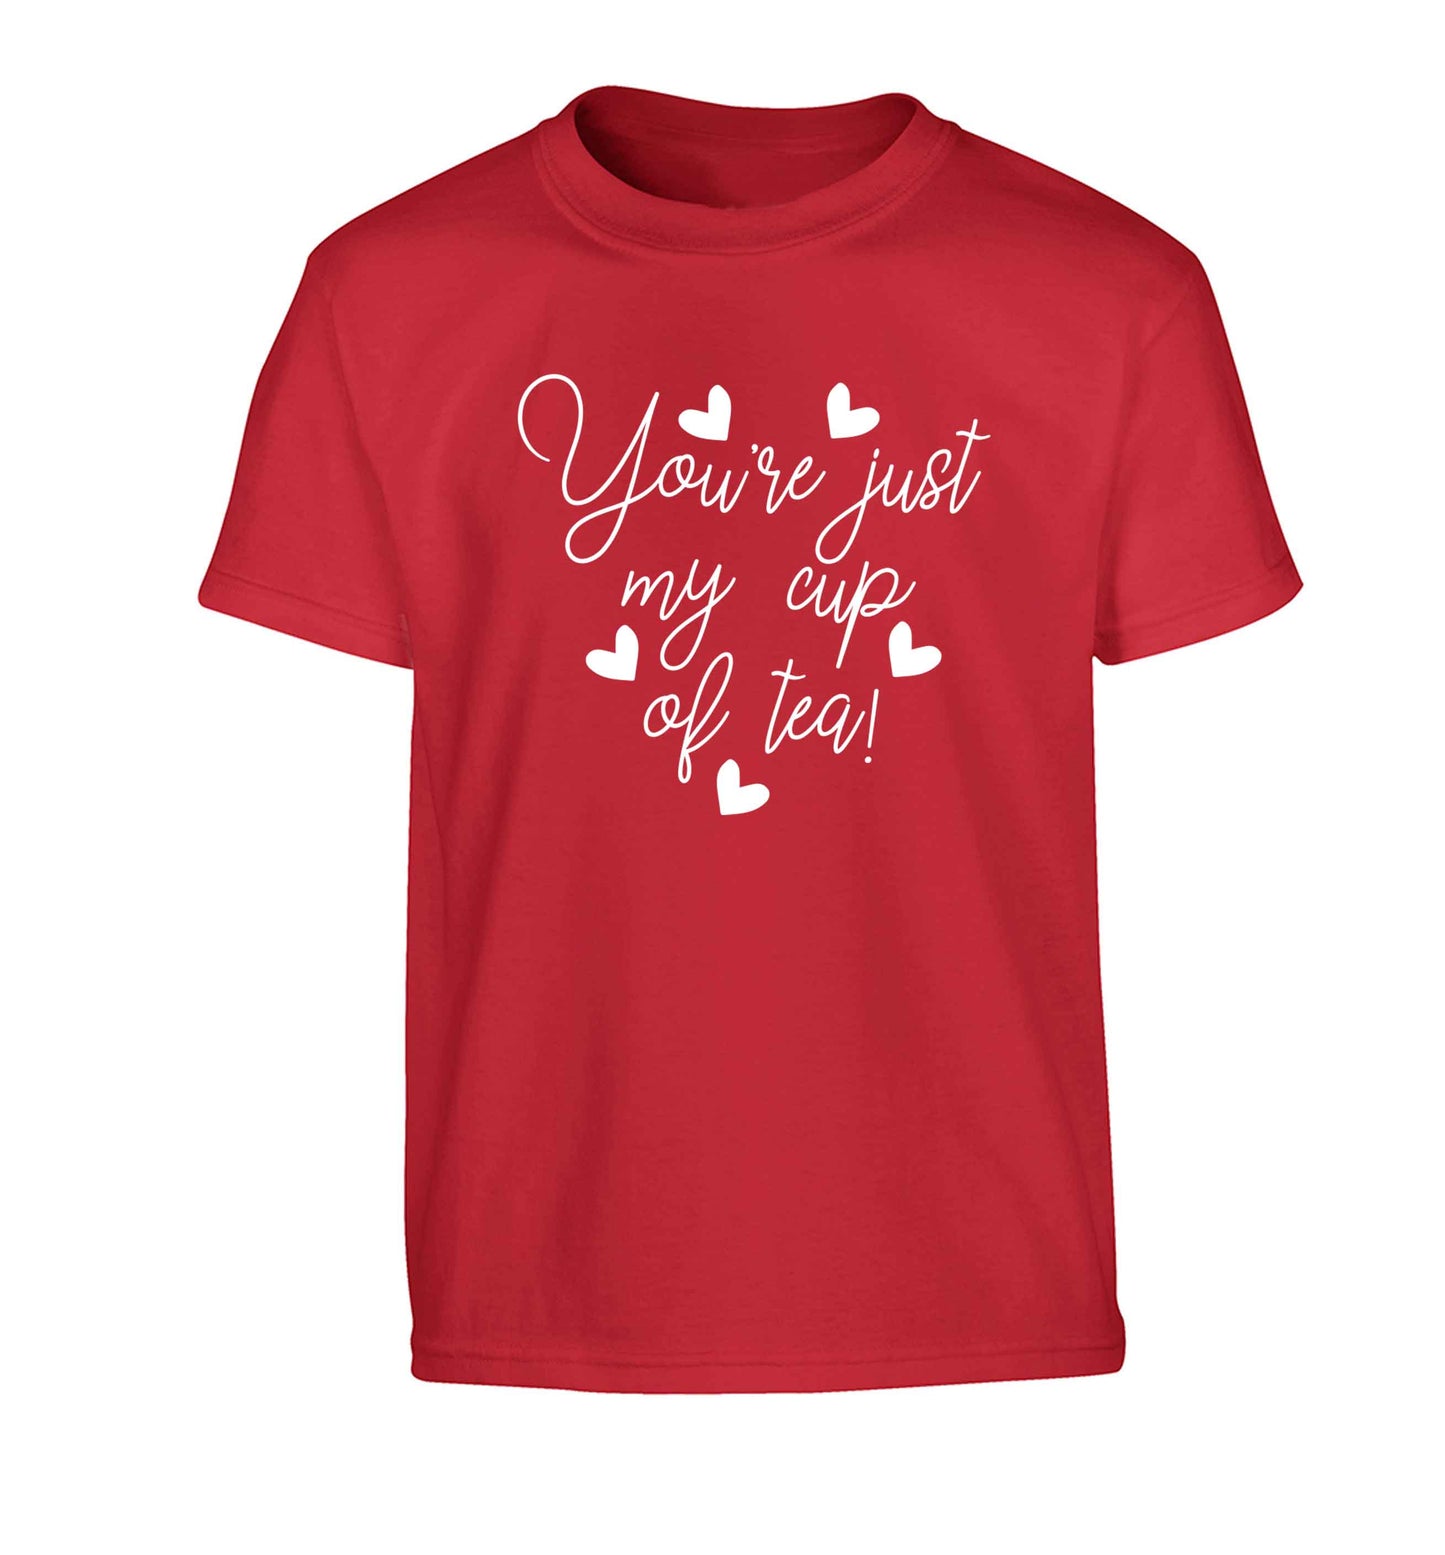 You're just my cup of tea Children's red Tshirt 12-13 Years